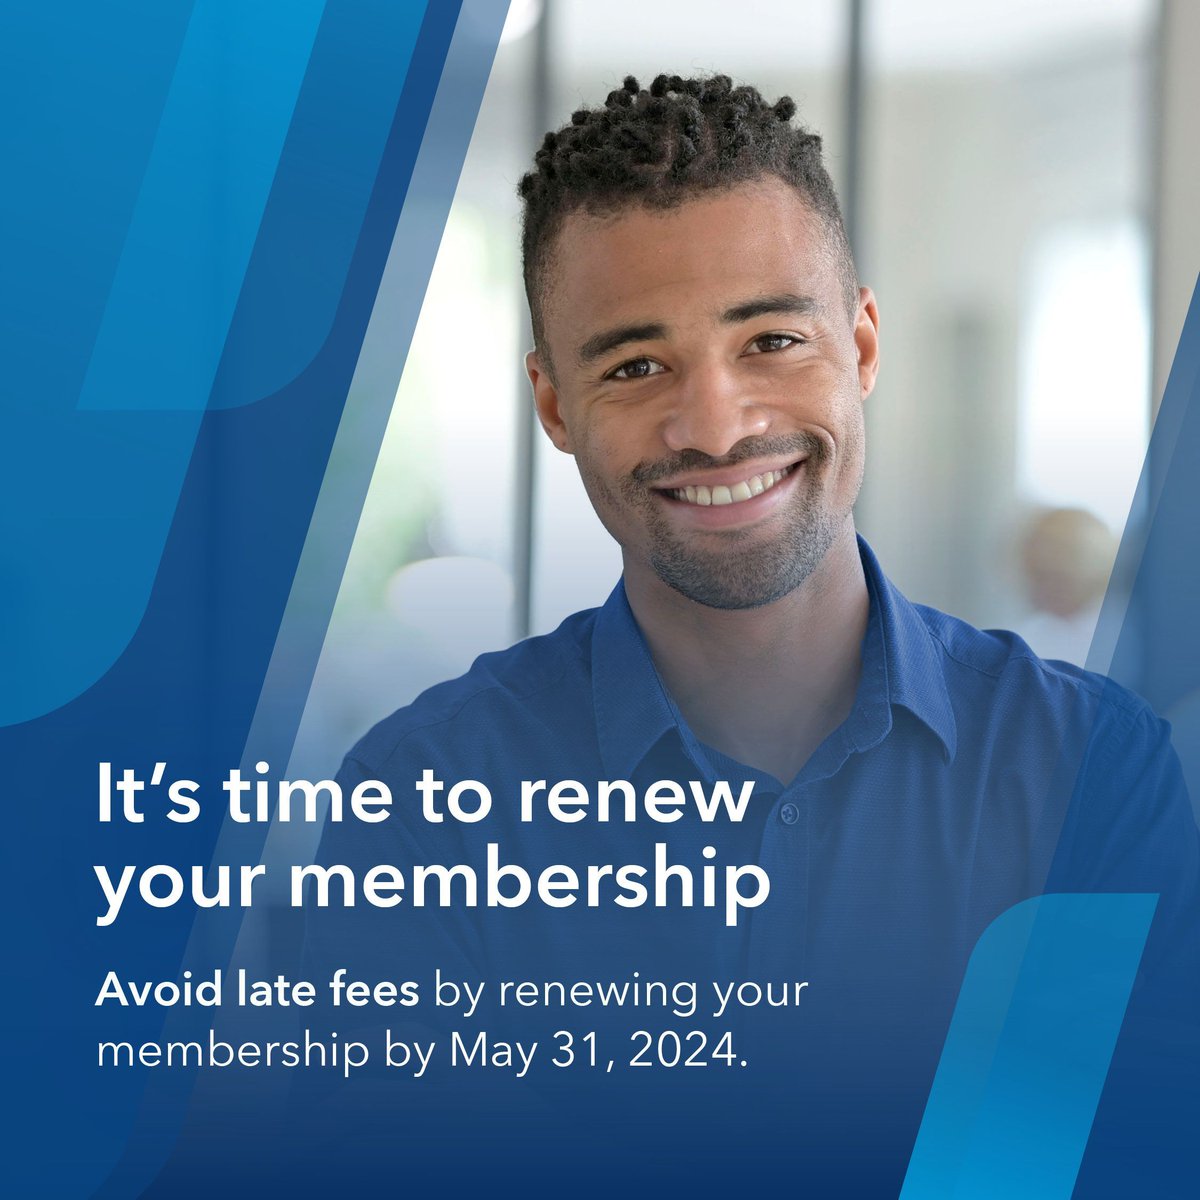 Hey members! Avoid late fees by renewing your membership by May 31. Renew your membership here: buff.ly/48IgjI9